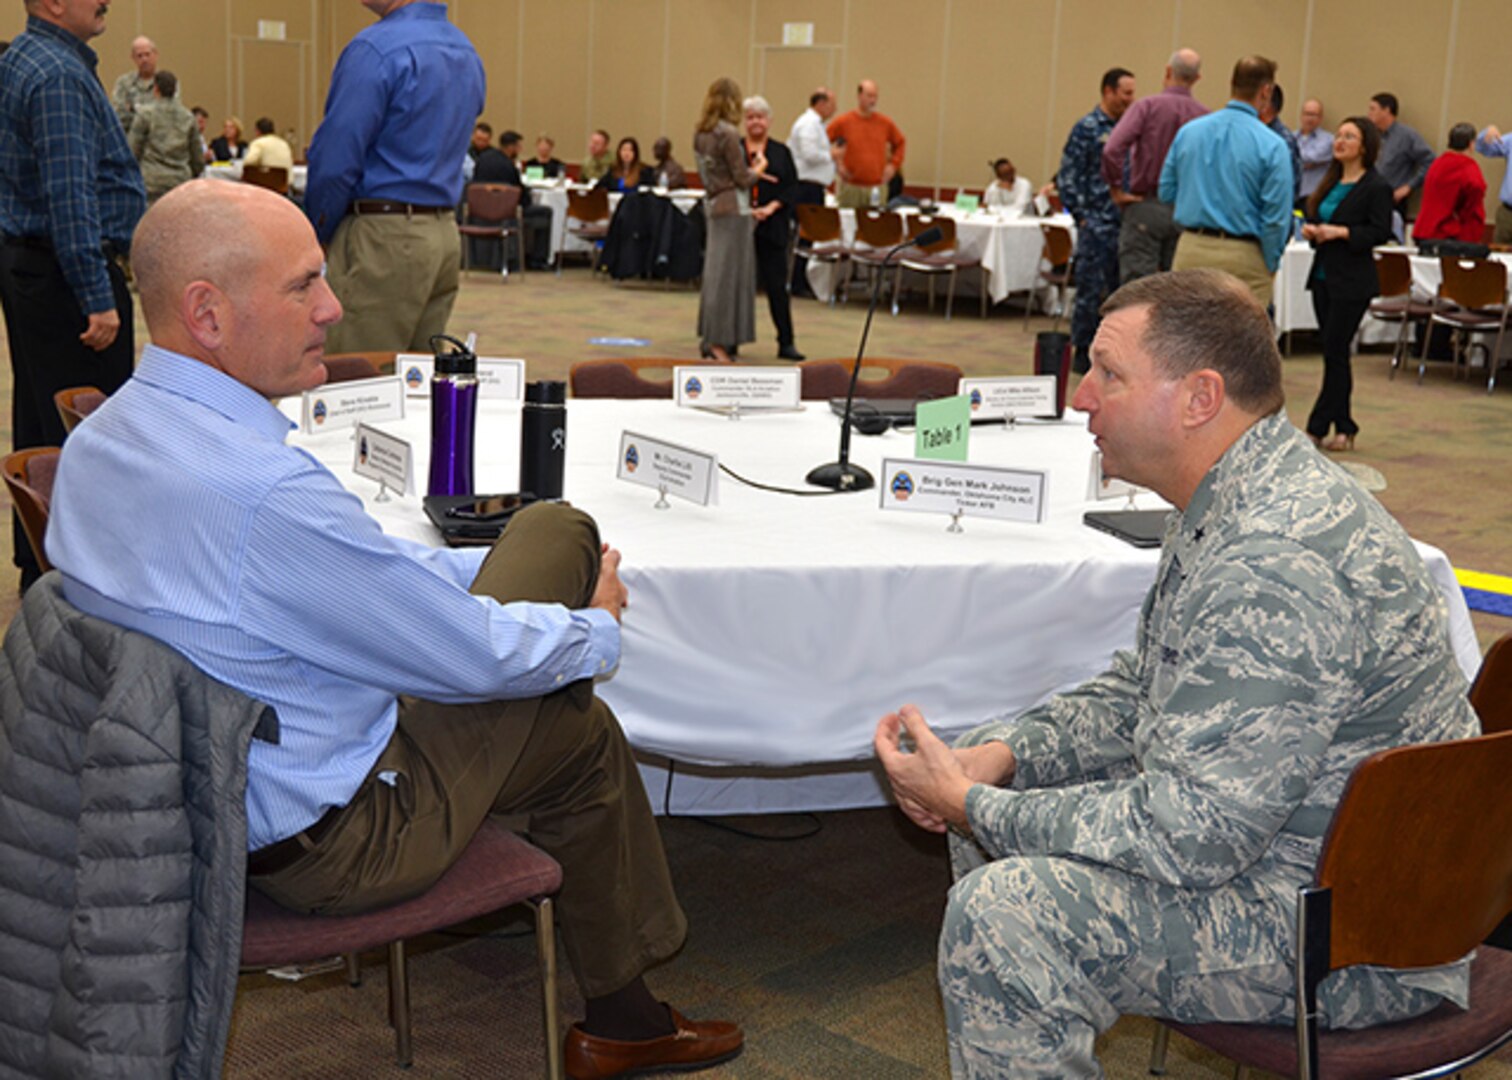 Former Defense Logistics Agency Aviation Commander Air Force Brig. Gen. (select) Mark Johnson, current commander of the Oklahoma City-Air Logistics Complex at Tinker Air Force Base, Oklahoma, and DLA Aviation's Deputy Commander Charlie Lilli have a discussion during a break at the annual Senior Leadership Conference, Feb. 7, 2017, on Defense Supply Center Richmond, Virginia. The conference was held from Feb. 7-9. Johnson spoke to DLA Aviation's leadership and strategic partners, from an Air Force customer’s perspective.